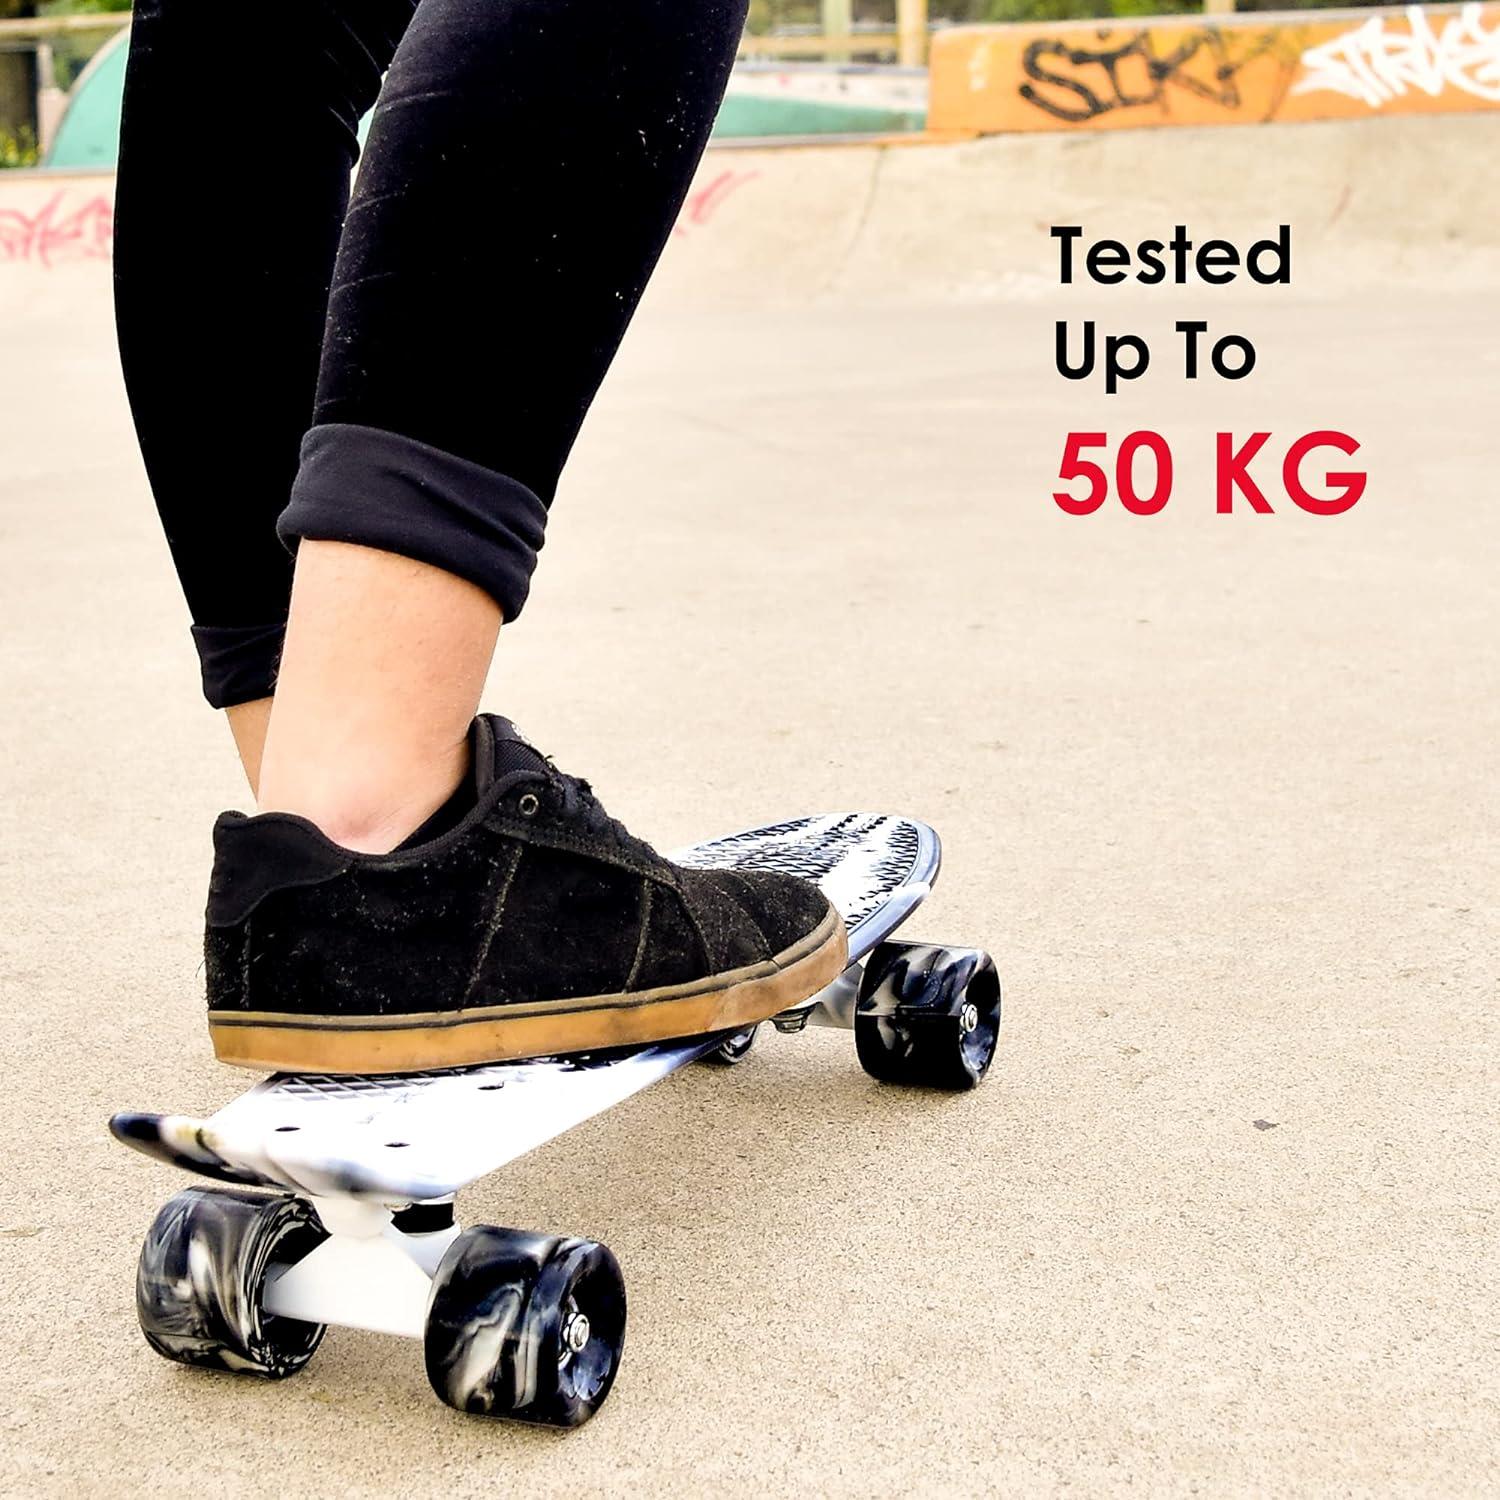 Retro Skateboard Black by The Magic Toy Shop - The Magic Toy Shop